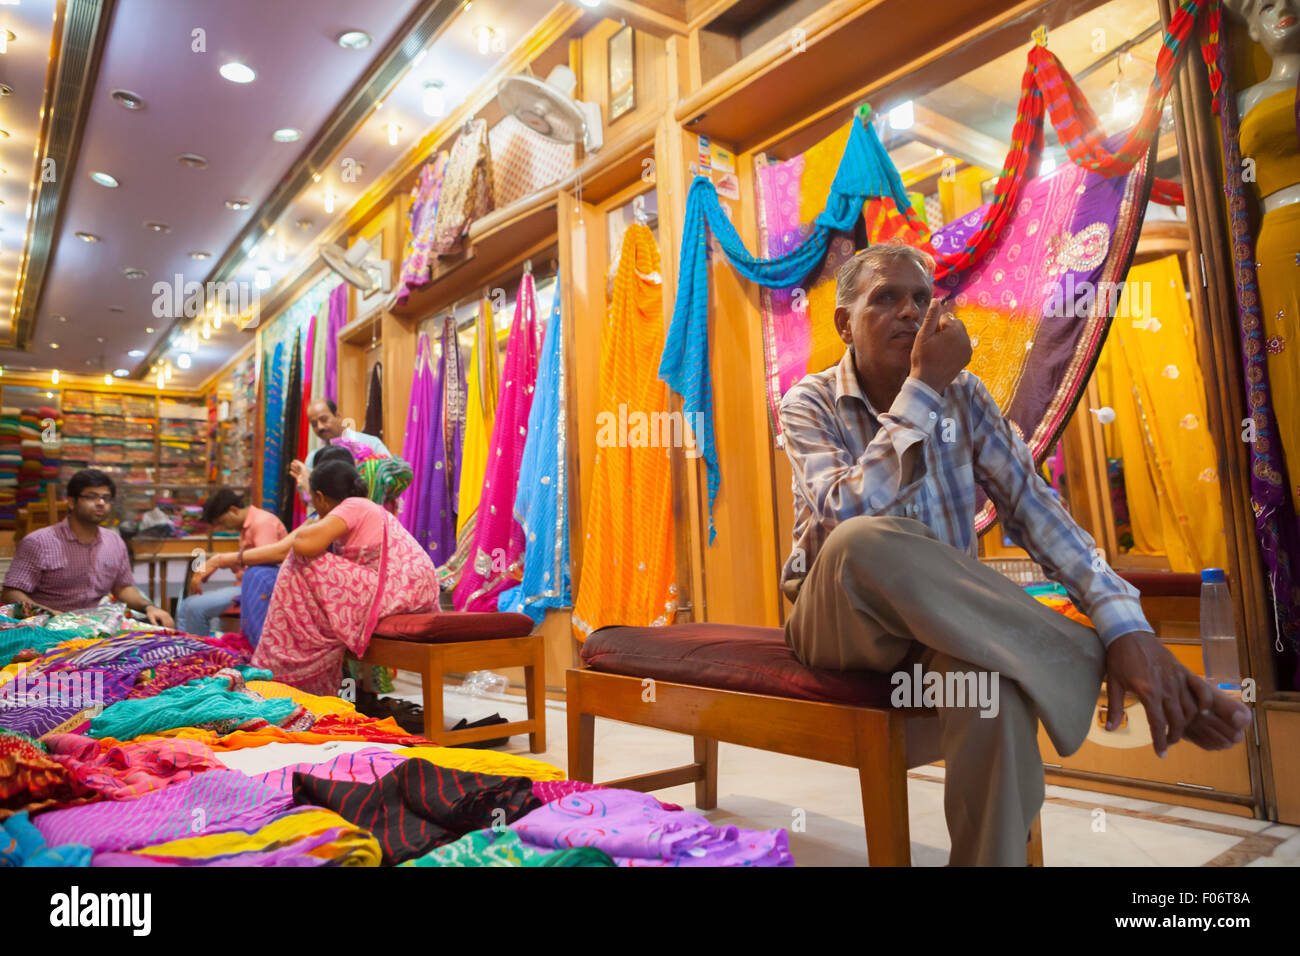 A man sitting inside a women's fashion store in Jaipur, Rajasthan, India. Stock Photo